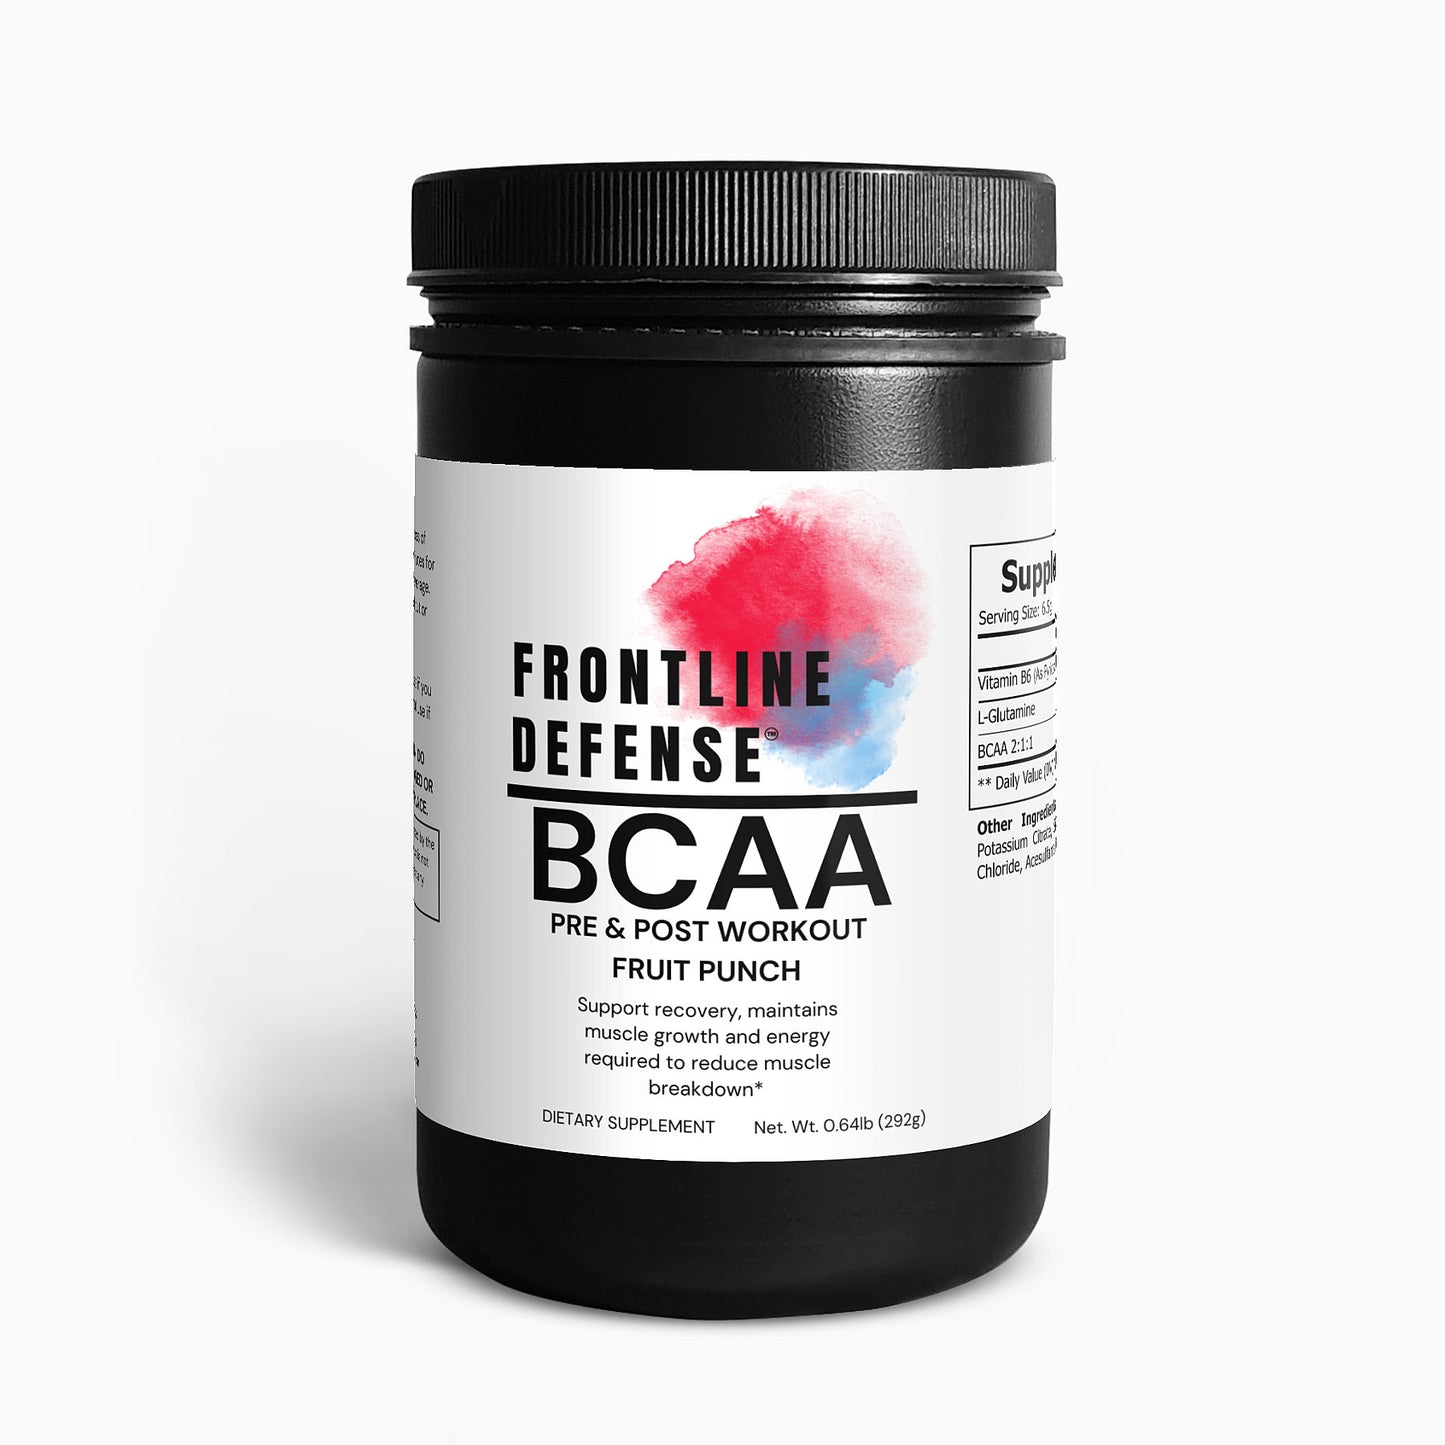 BCAA Pre & Post Workout Fruit Punch